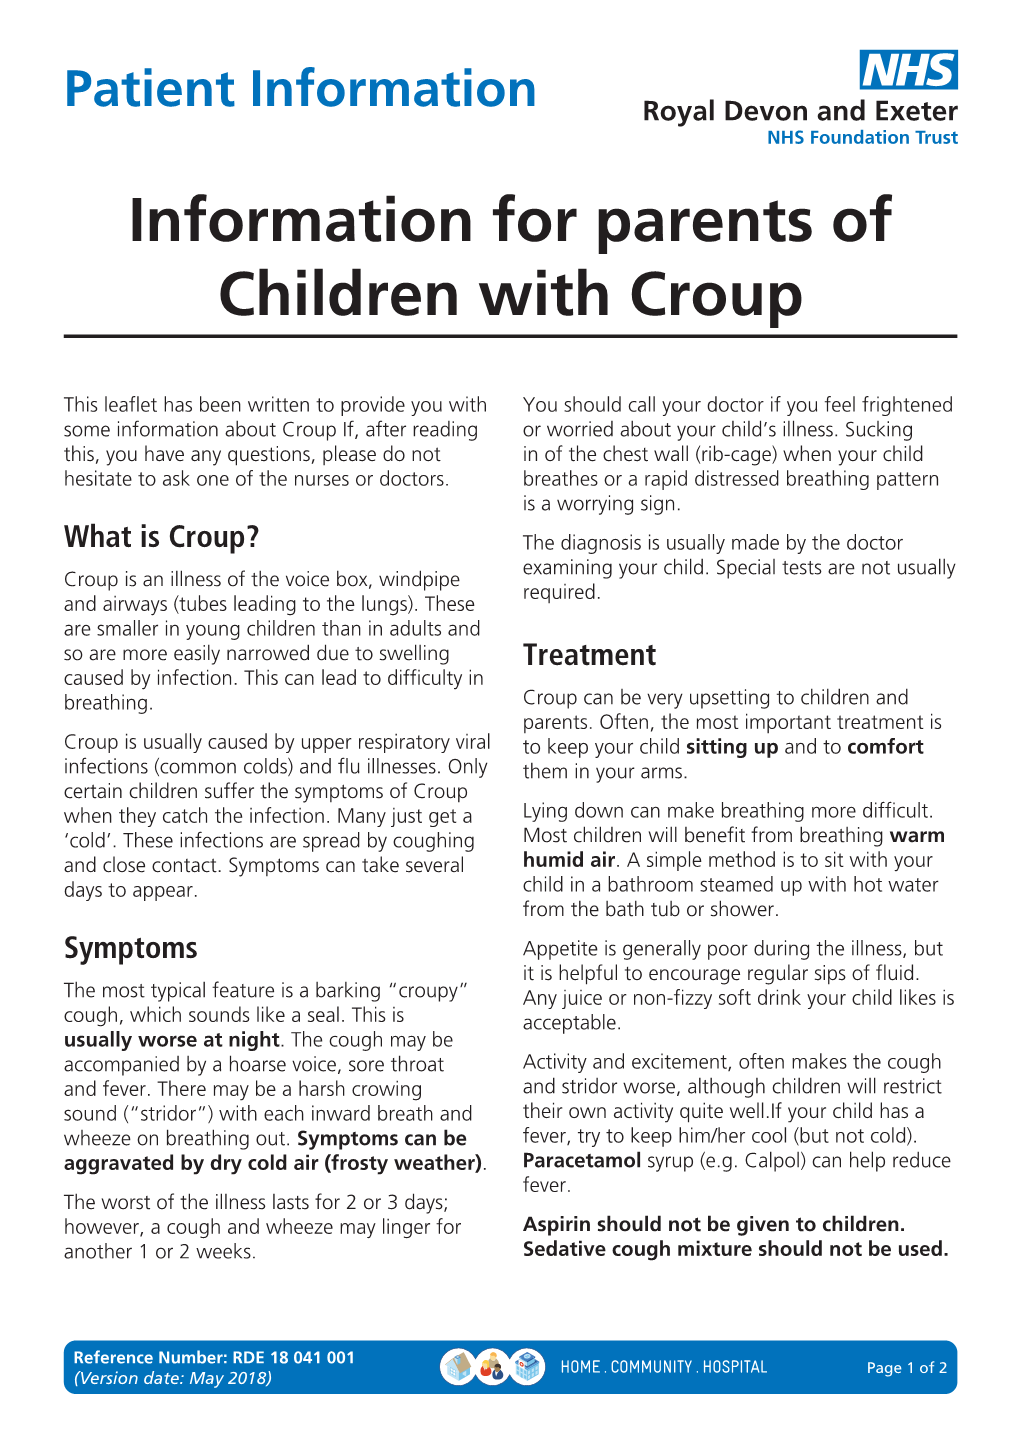 Information for Parents of Children with Croup